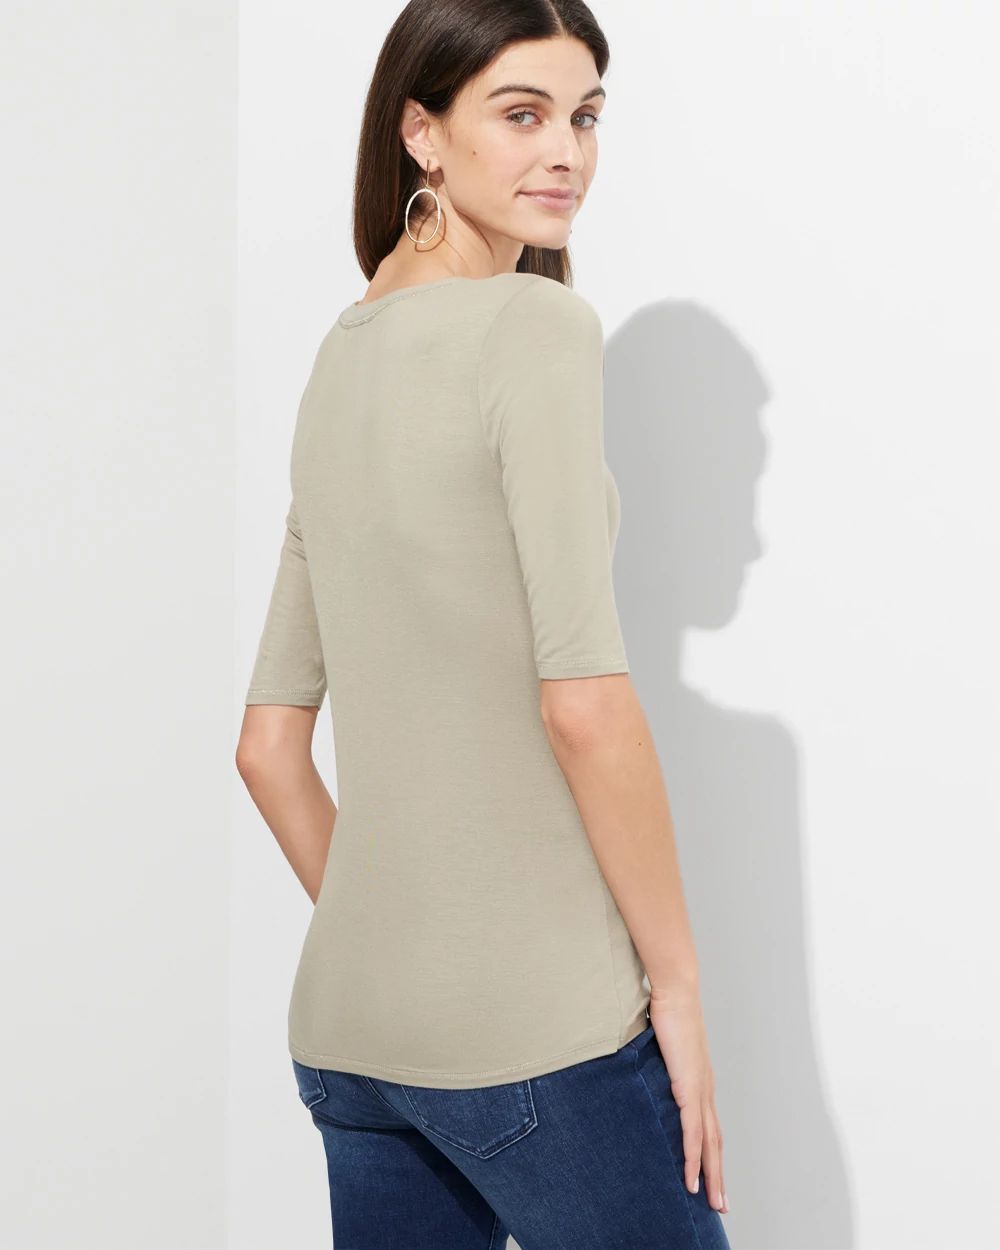 Outlet WHBM Elbow Sleeve V-Neck Knit Tee click to view larger image.